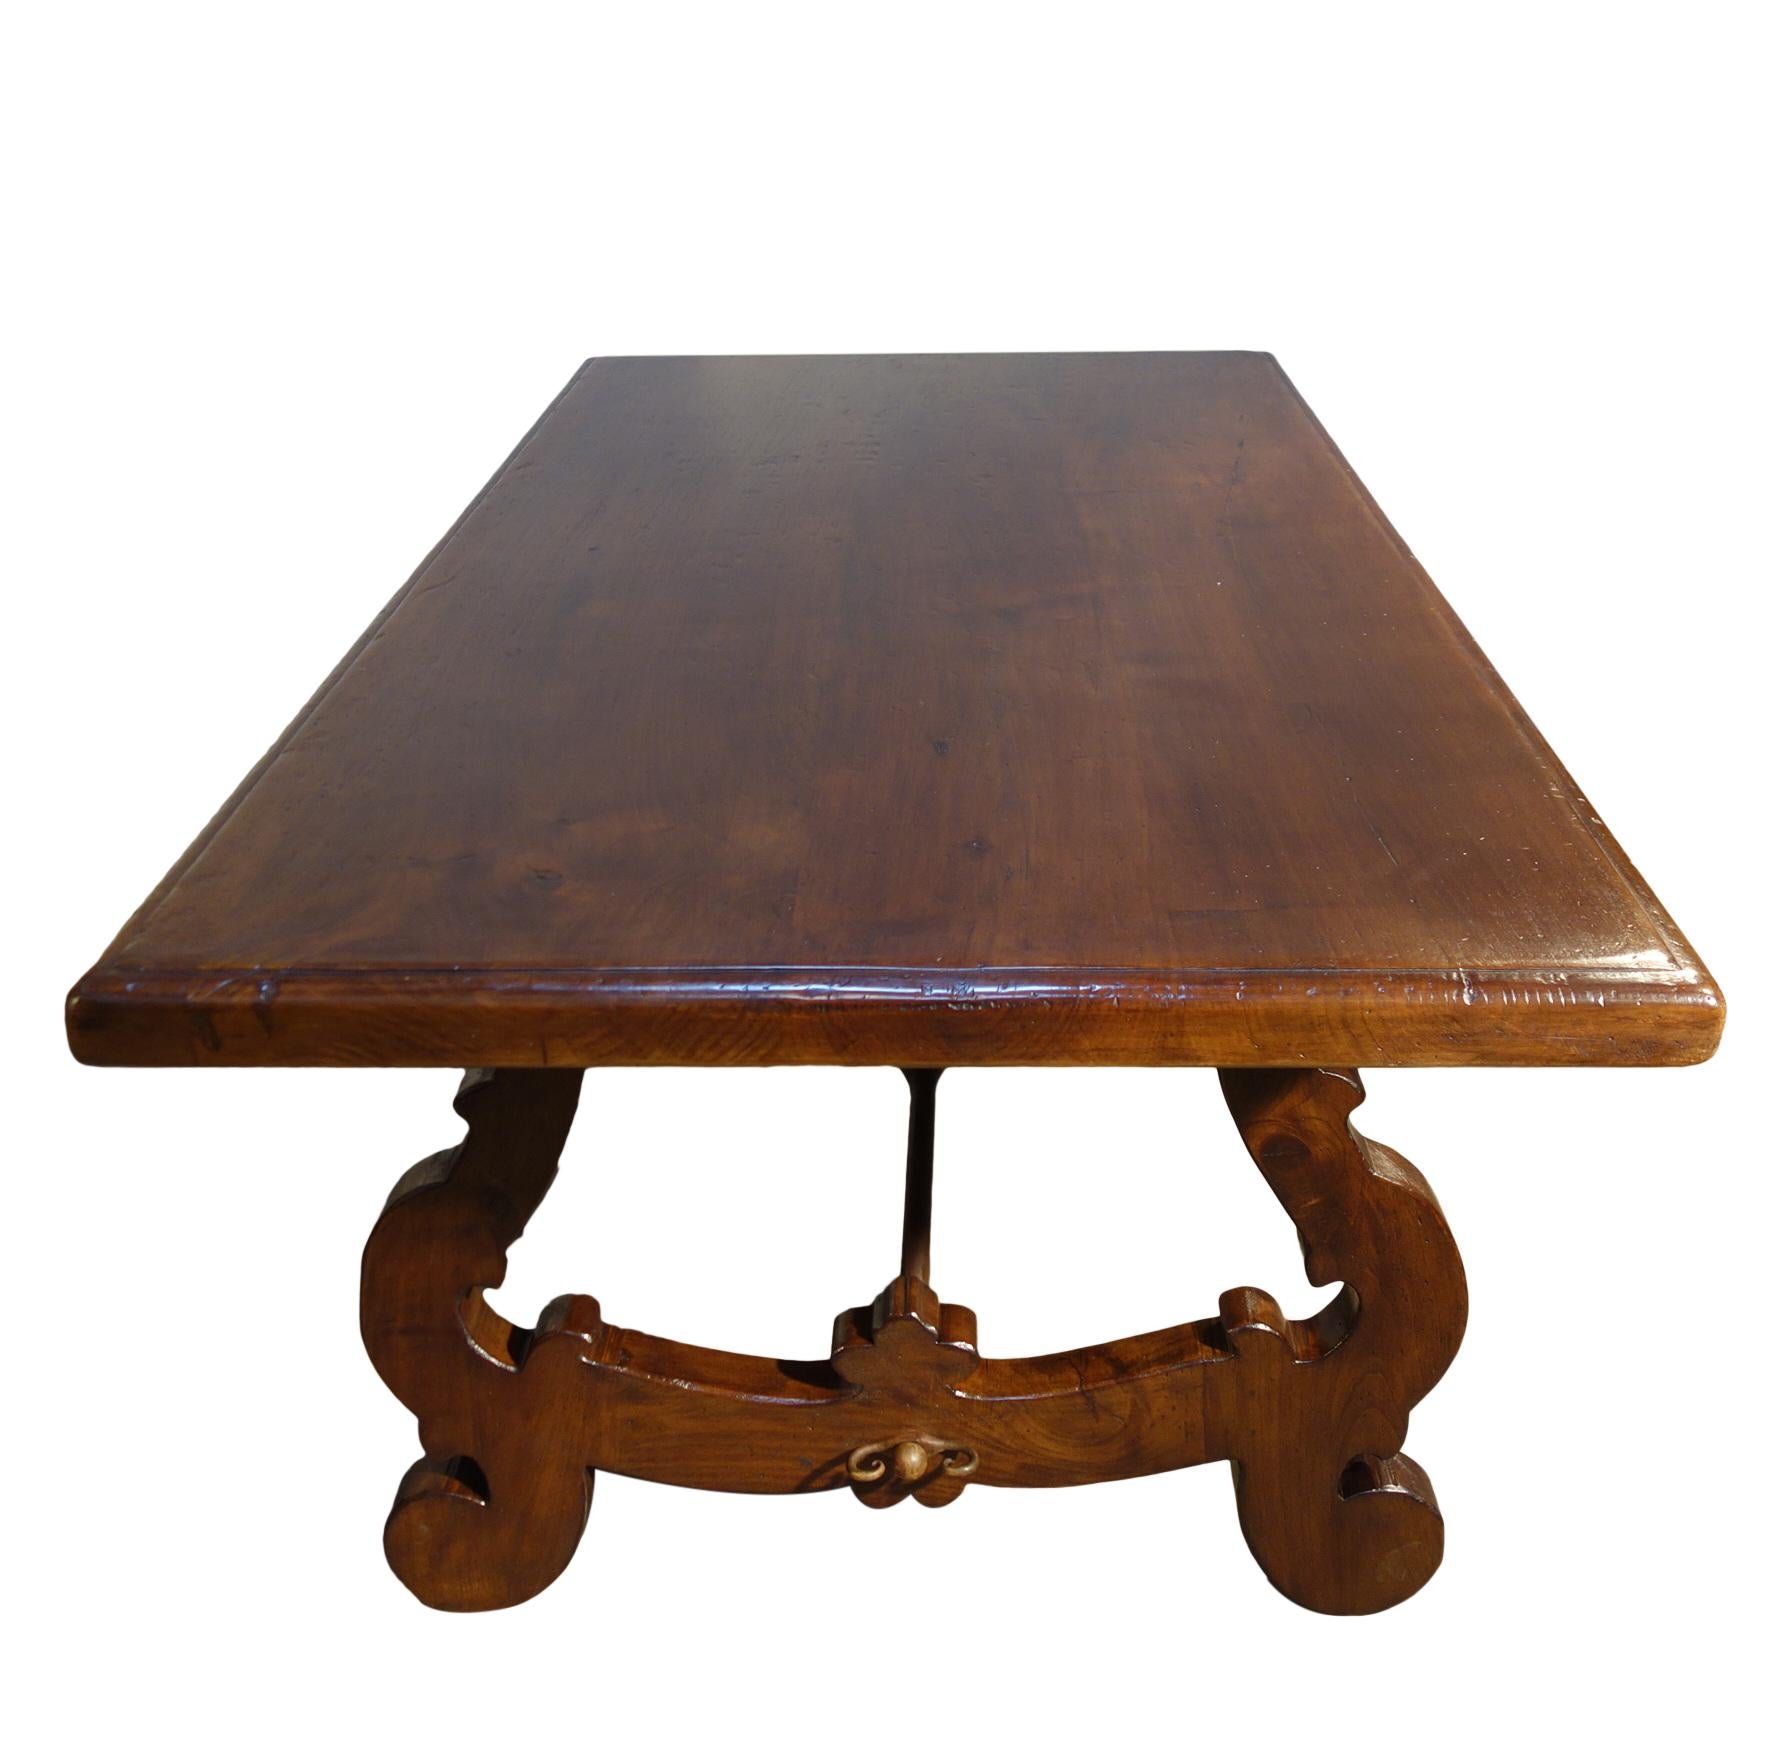 Forged 17th C Refectory Style Dark Italian Walnut LIRA Table with size & finish options For Sale